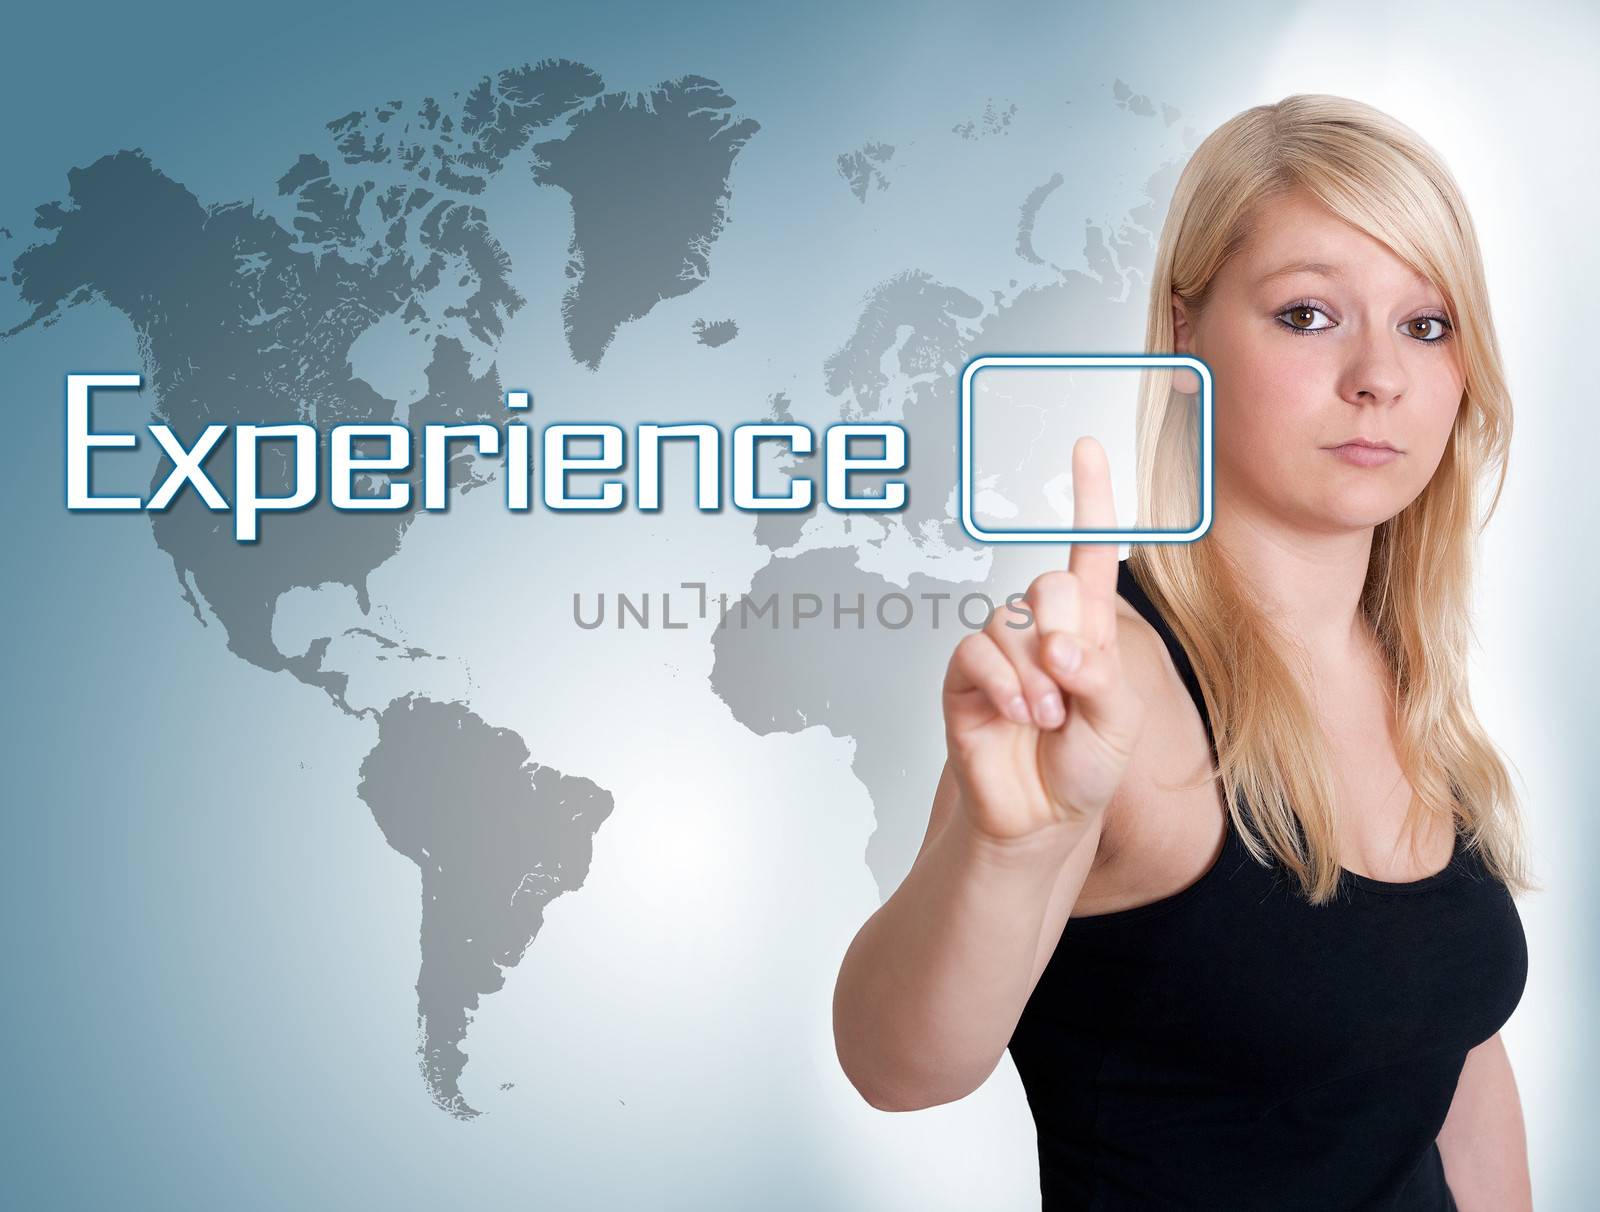 Young woman press digital Experience button on interface in front of her